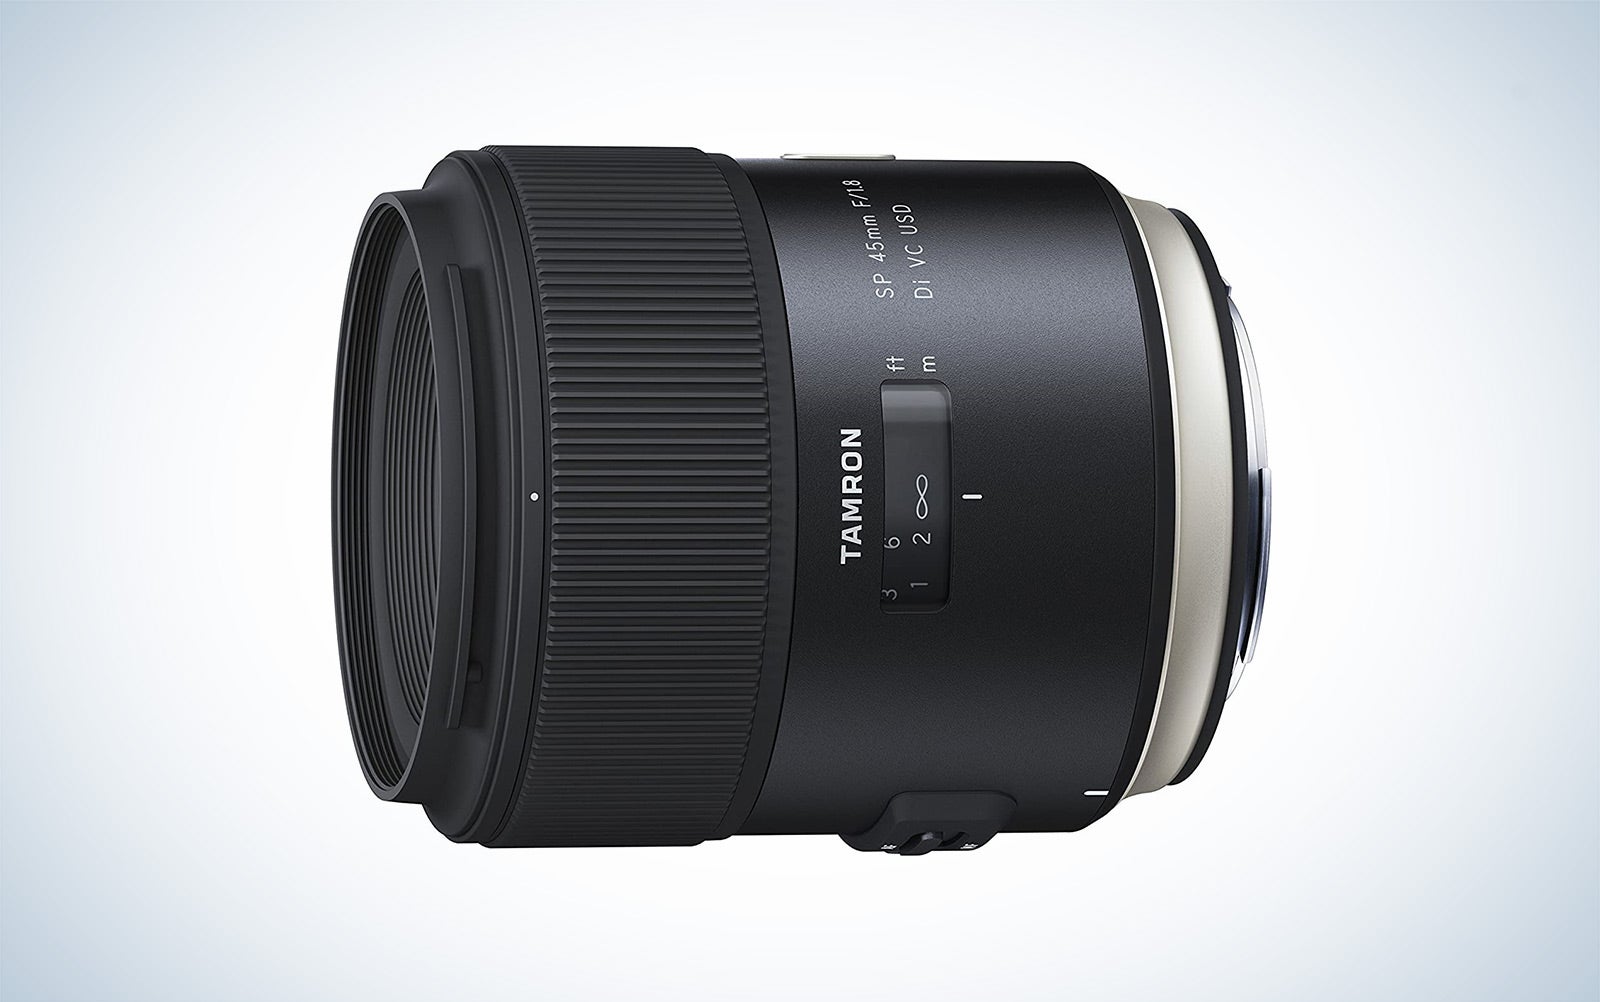 The Tamron 45mm is the best third-party lens for Nikon cameras.